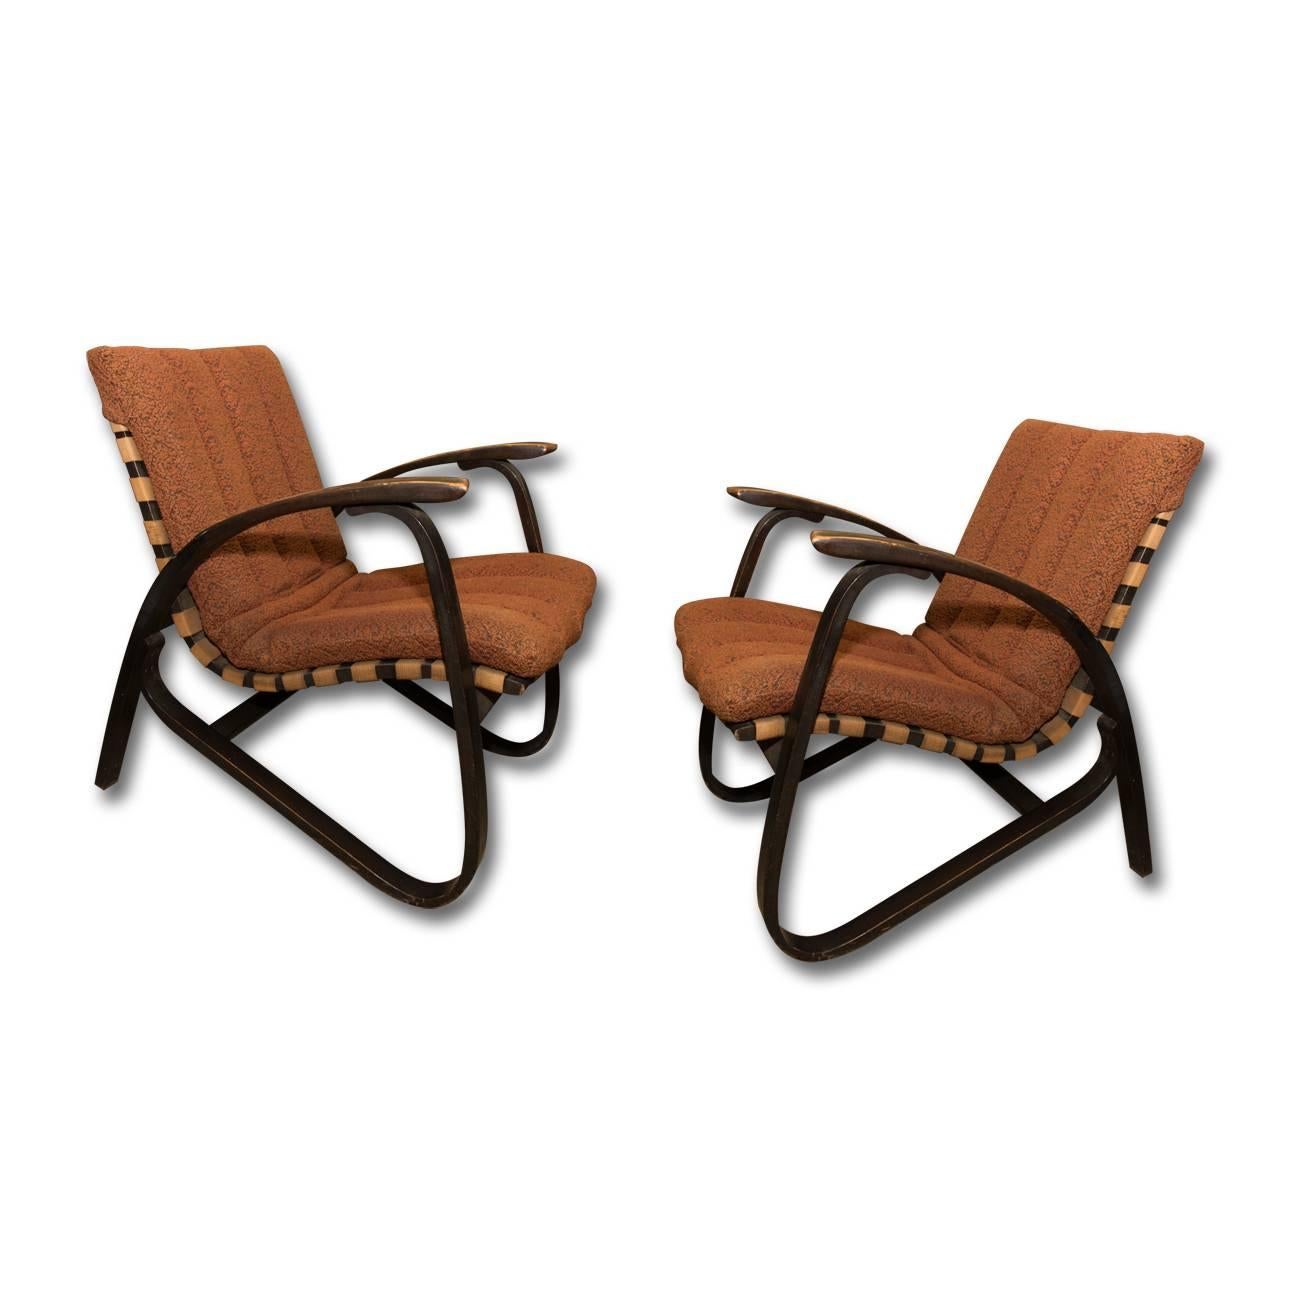 Fabric Pair of Bentwood Armchairs with Woven Straps by Jan Vanek for UP Zavody, 1930s